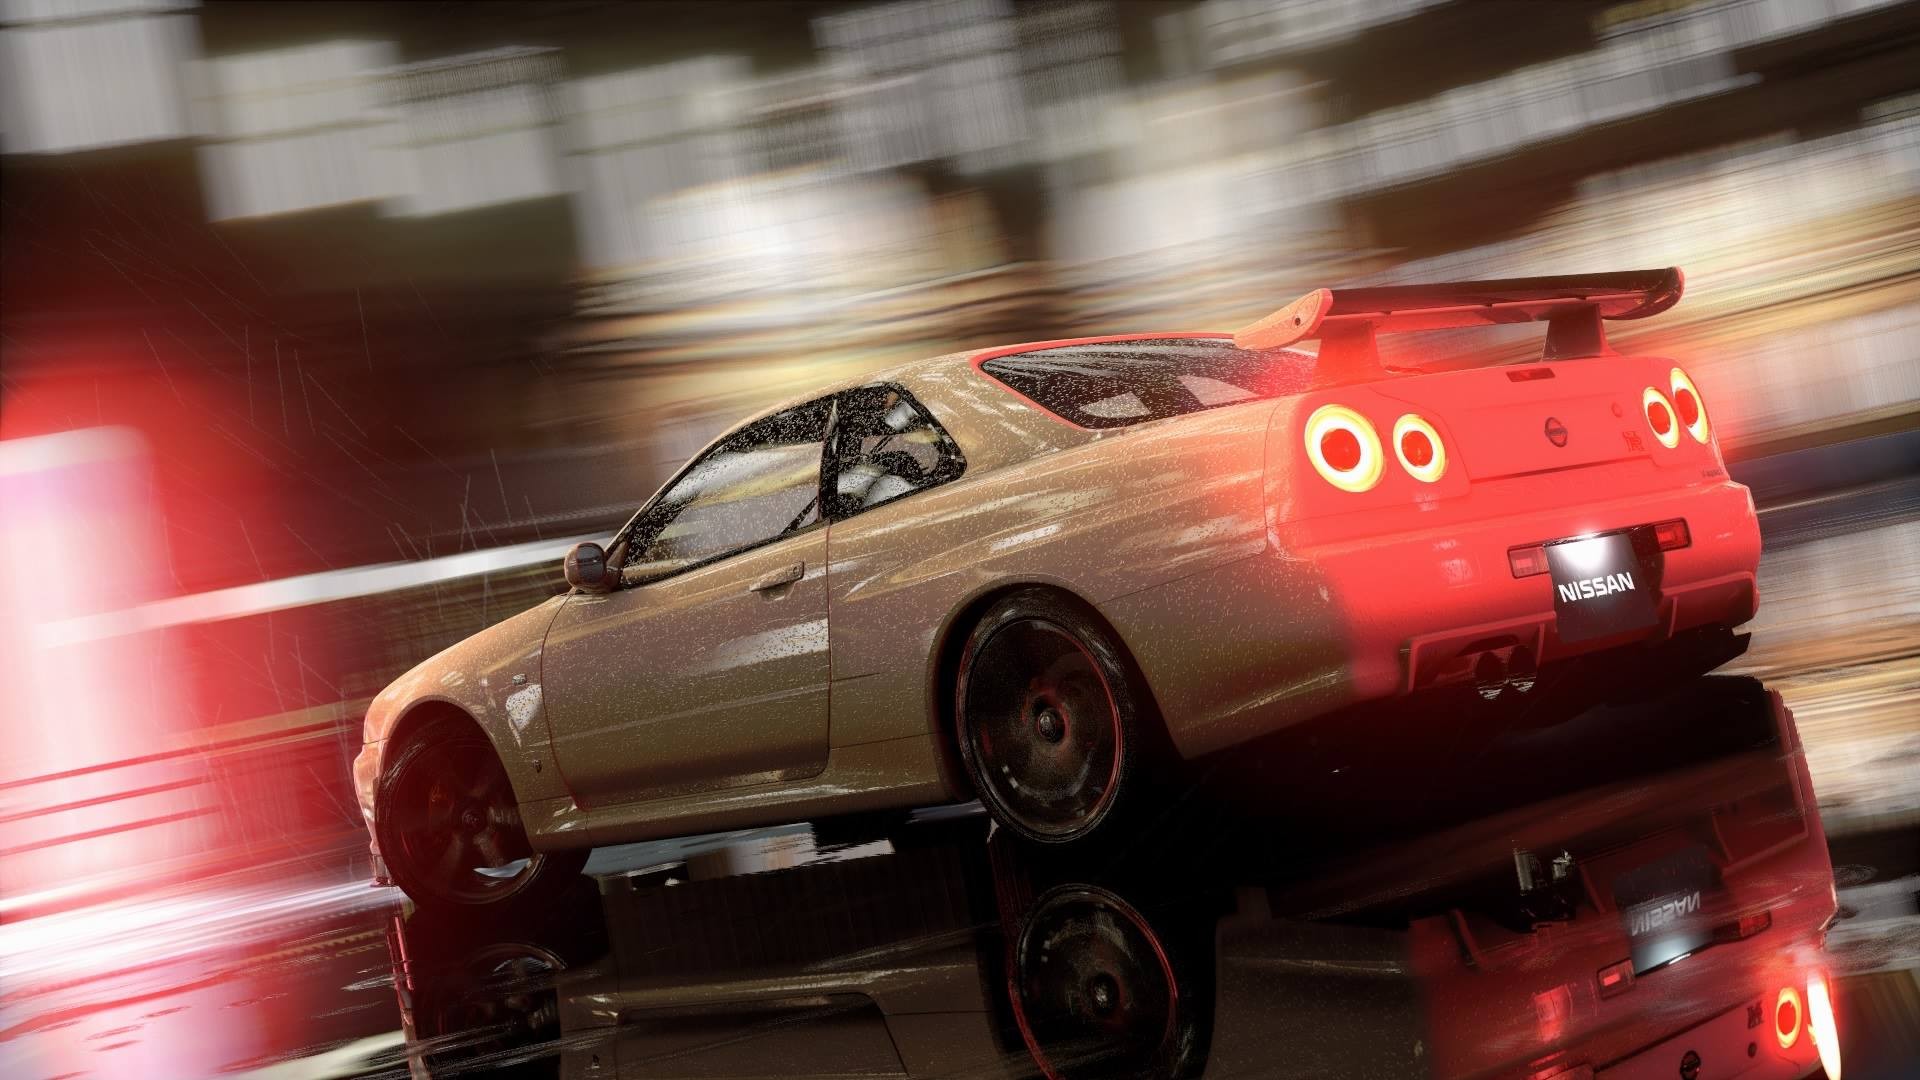 car, Nissan, Video Games, Need For Speed, Nissan Skyline, Nissan Skyline GT R, Nissan Skyline GT R R34 Wallpaper